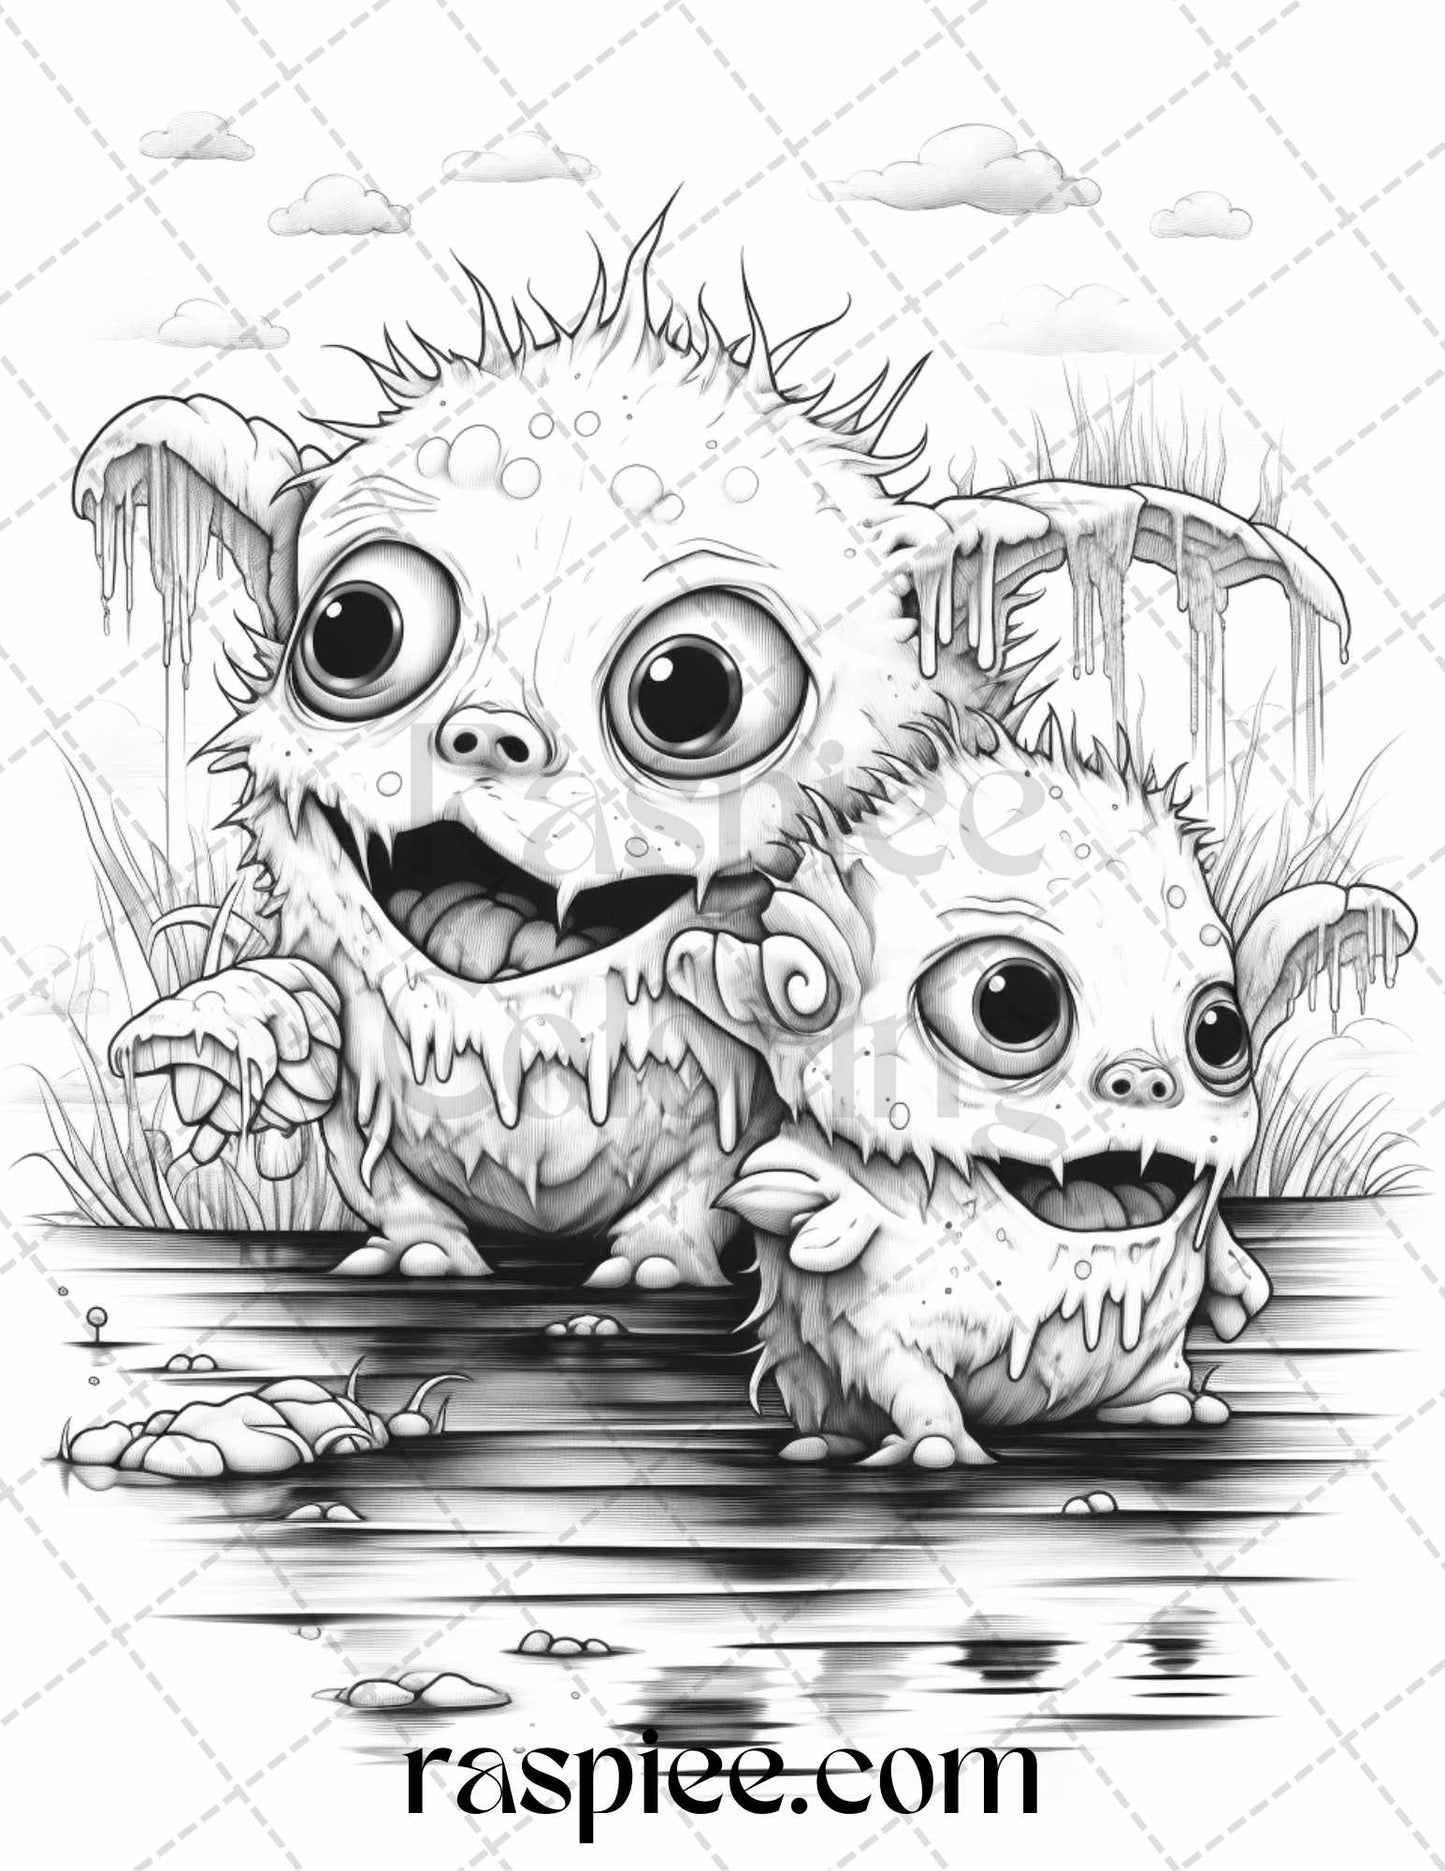 40 Halloween Creepy Kawaii Grayscale Coloring Pages for Adults and Kids, Printable PDF File Instant Download